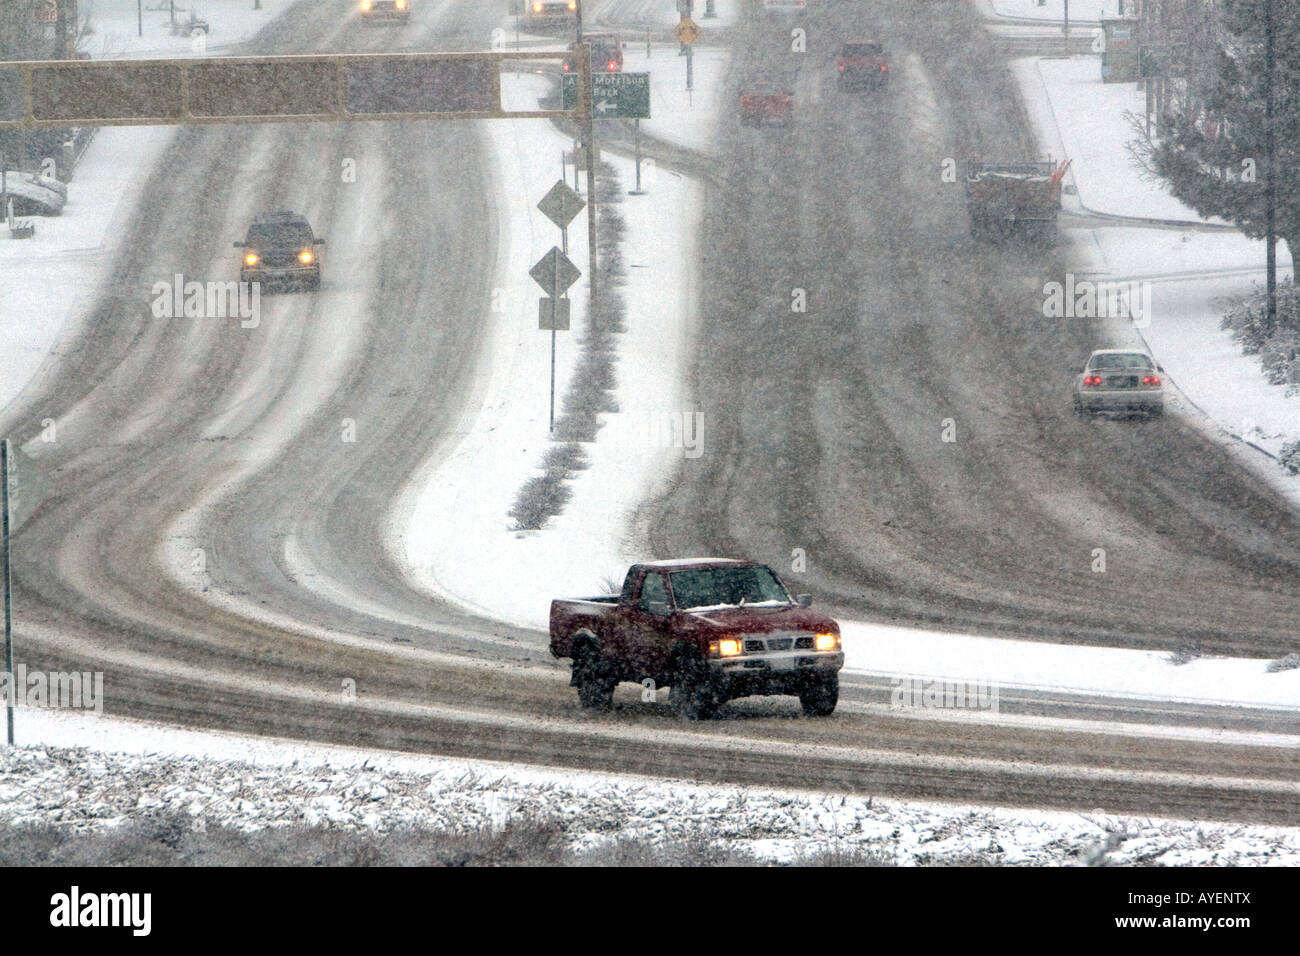 Automobiles driving on a snowy day in Boise Idaho Stock Photo